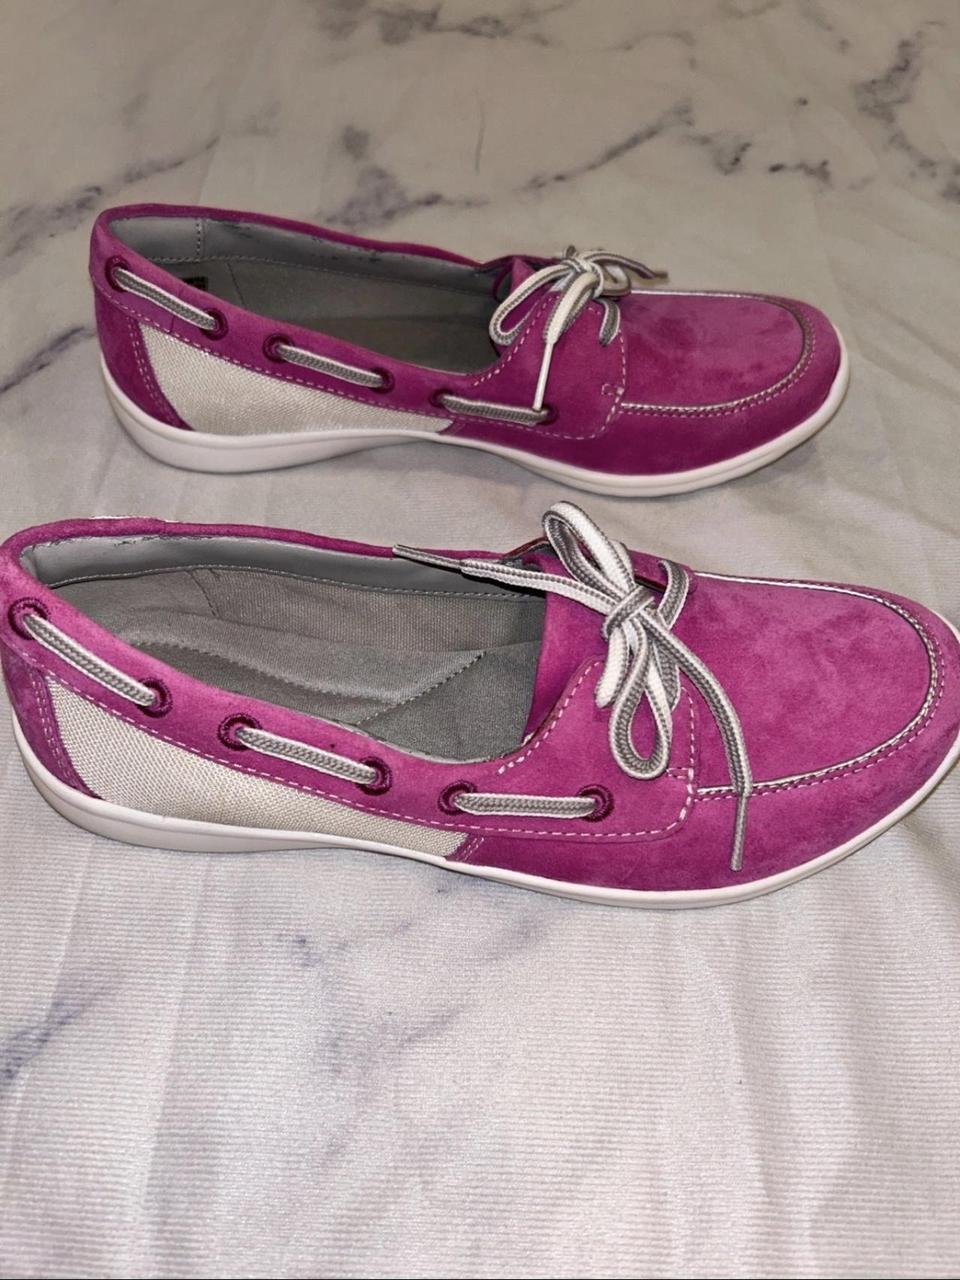 Clarks Women's Pink Boat-shoes (2)